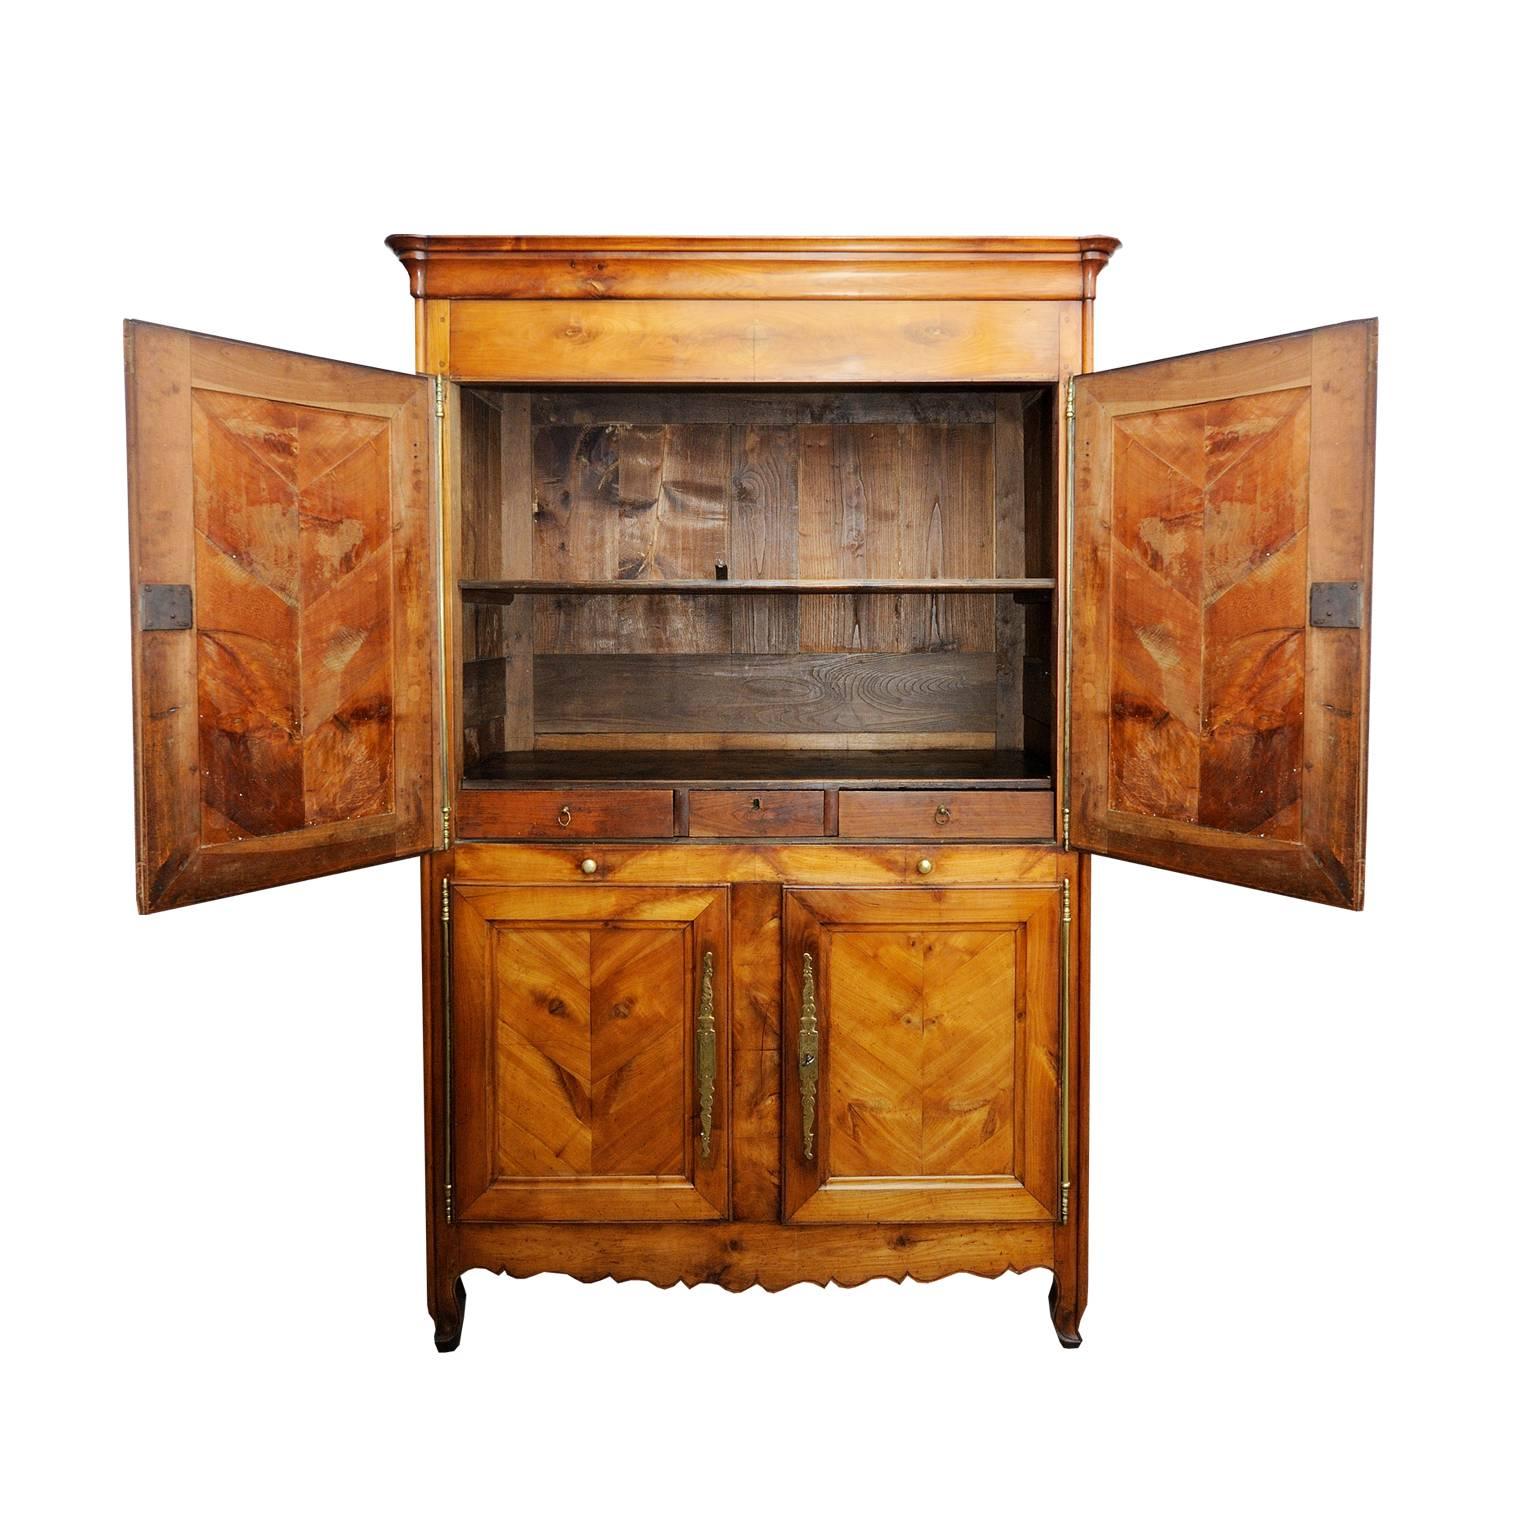 This is a rare and beautifully proportioned French, mid-18th century, Louis XV period four-door cheerywood Armoire Cupboard with chevron panels and original brass escutcheons and long barrel hinges. Pair of half drawers to centre and fitted drawers